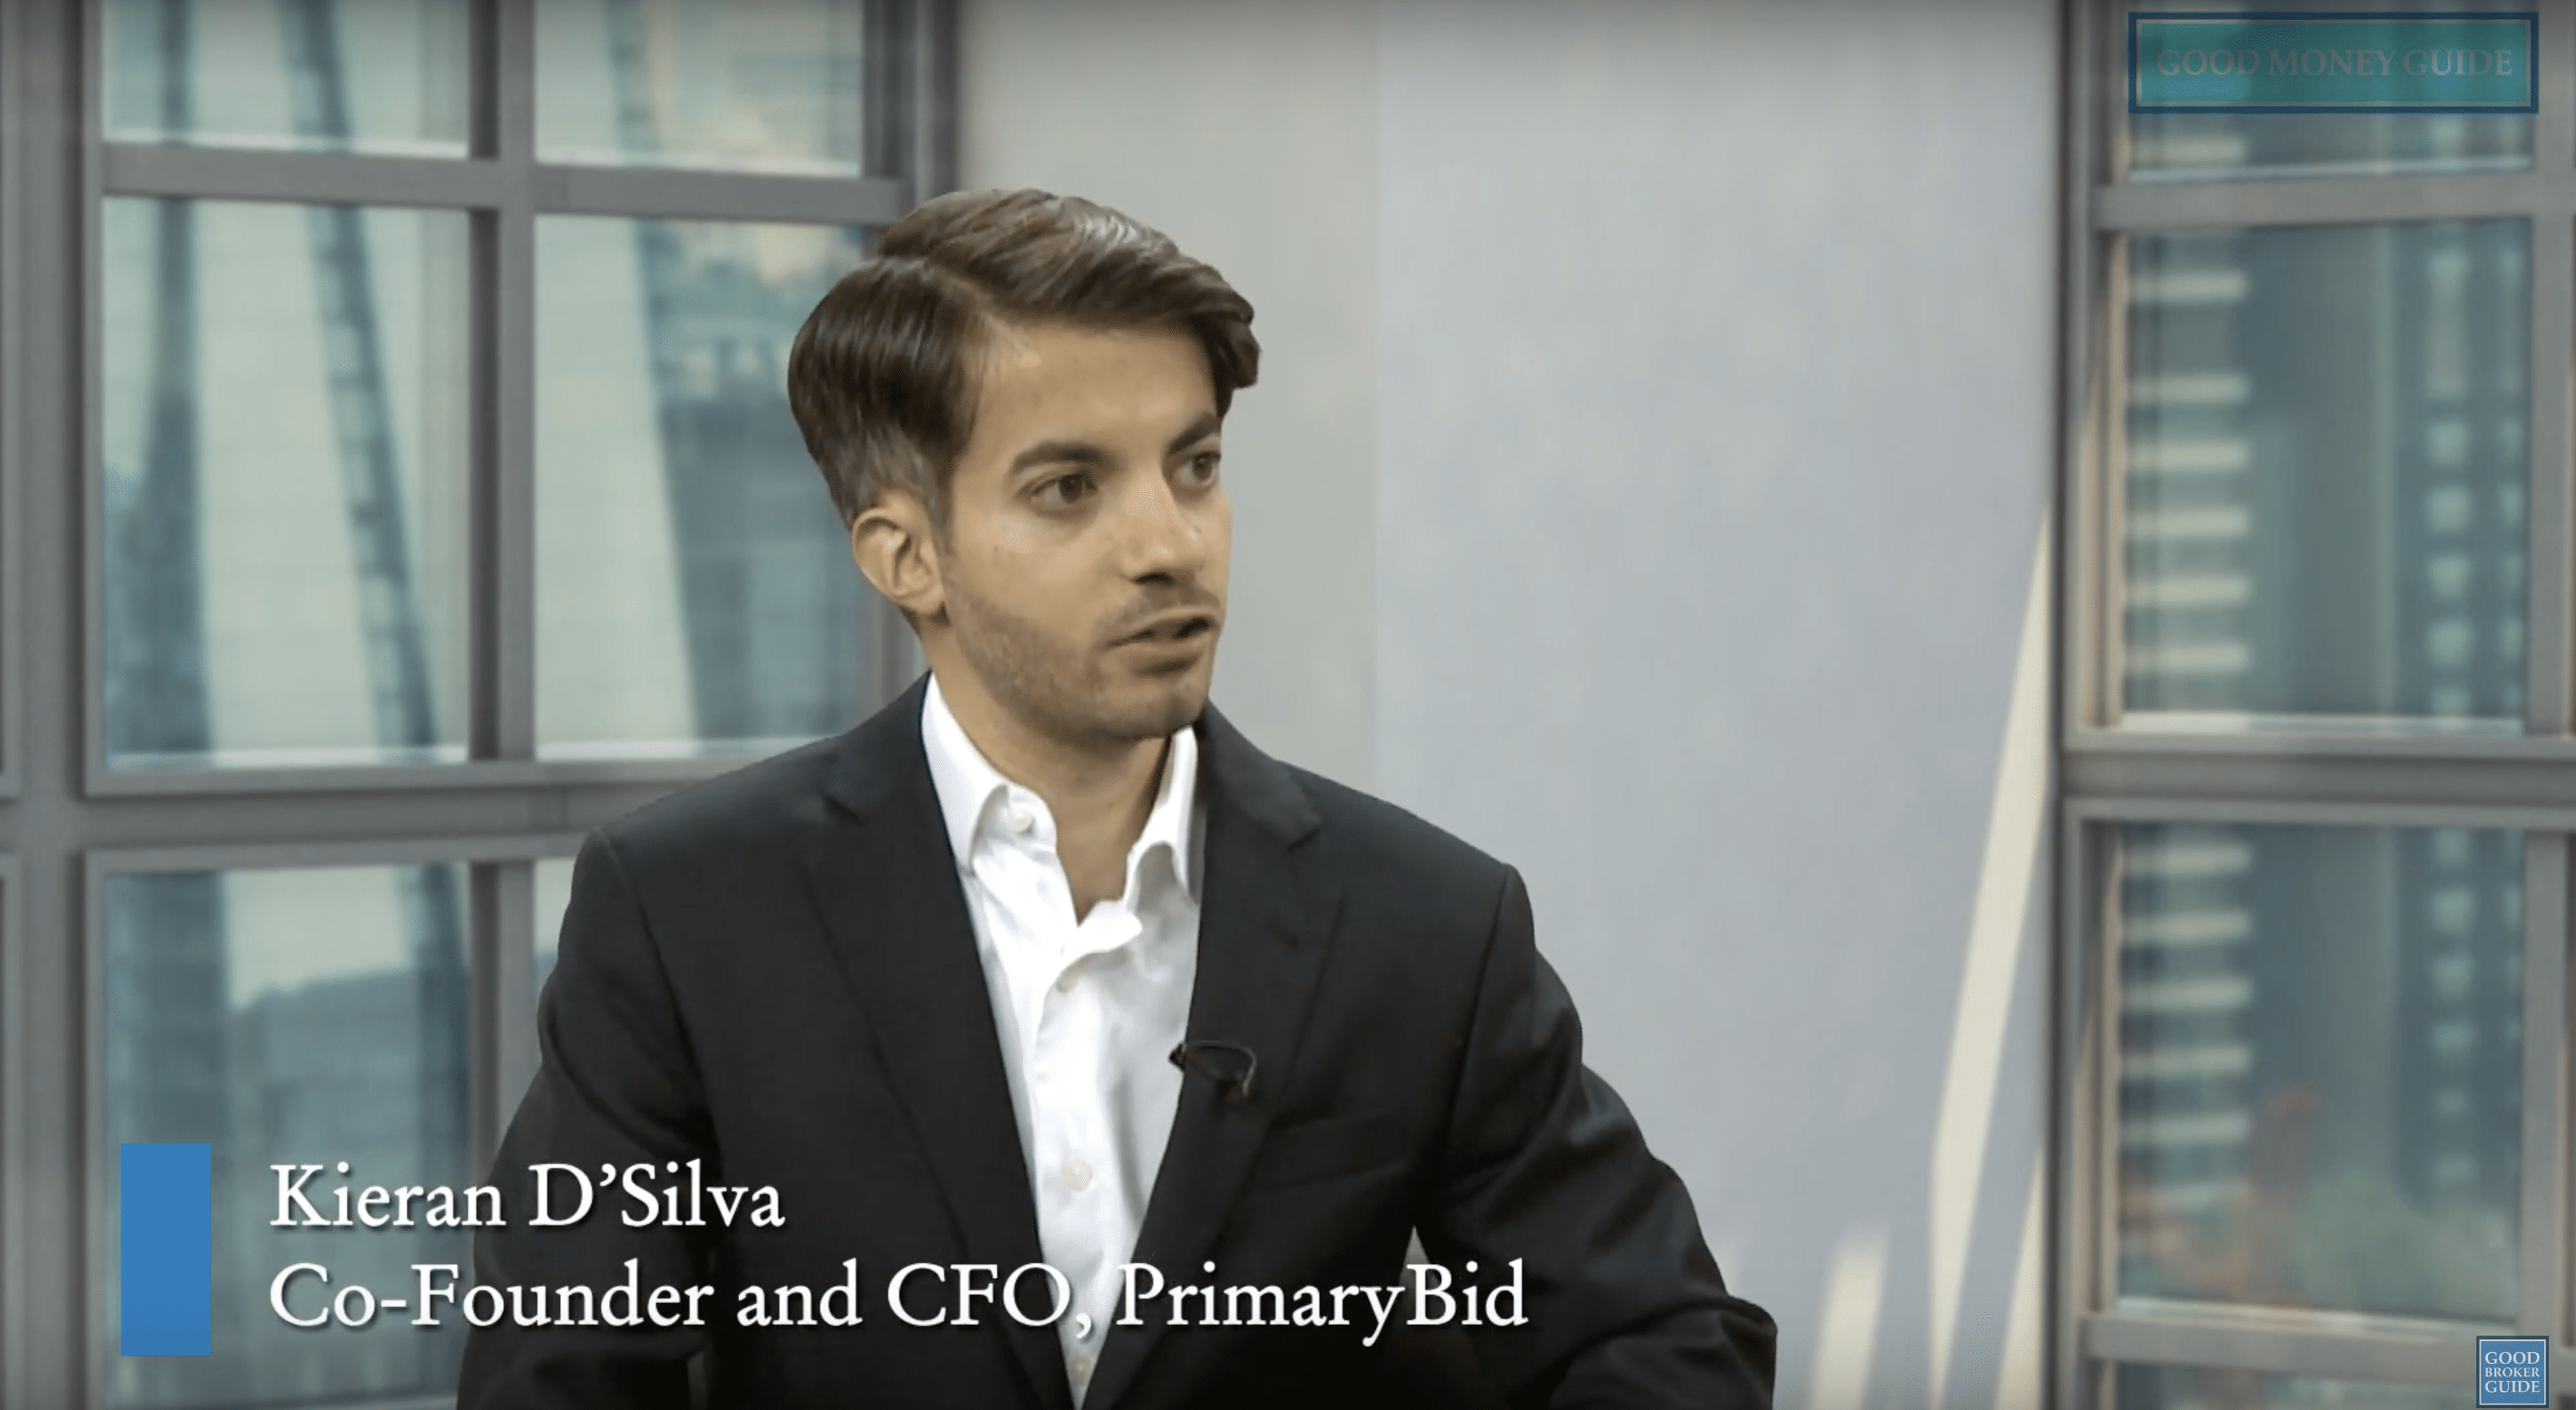 Kieran D'Silva from PrimaryBid talks about how to invest ...